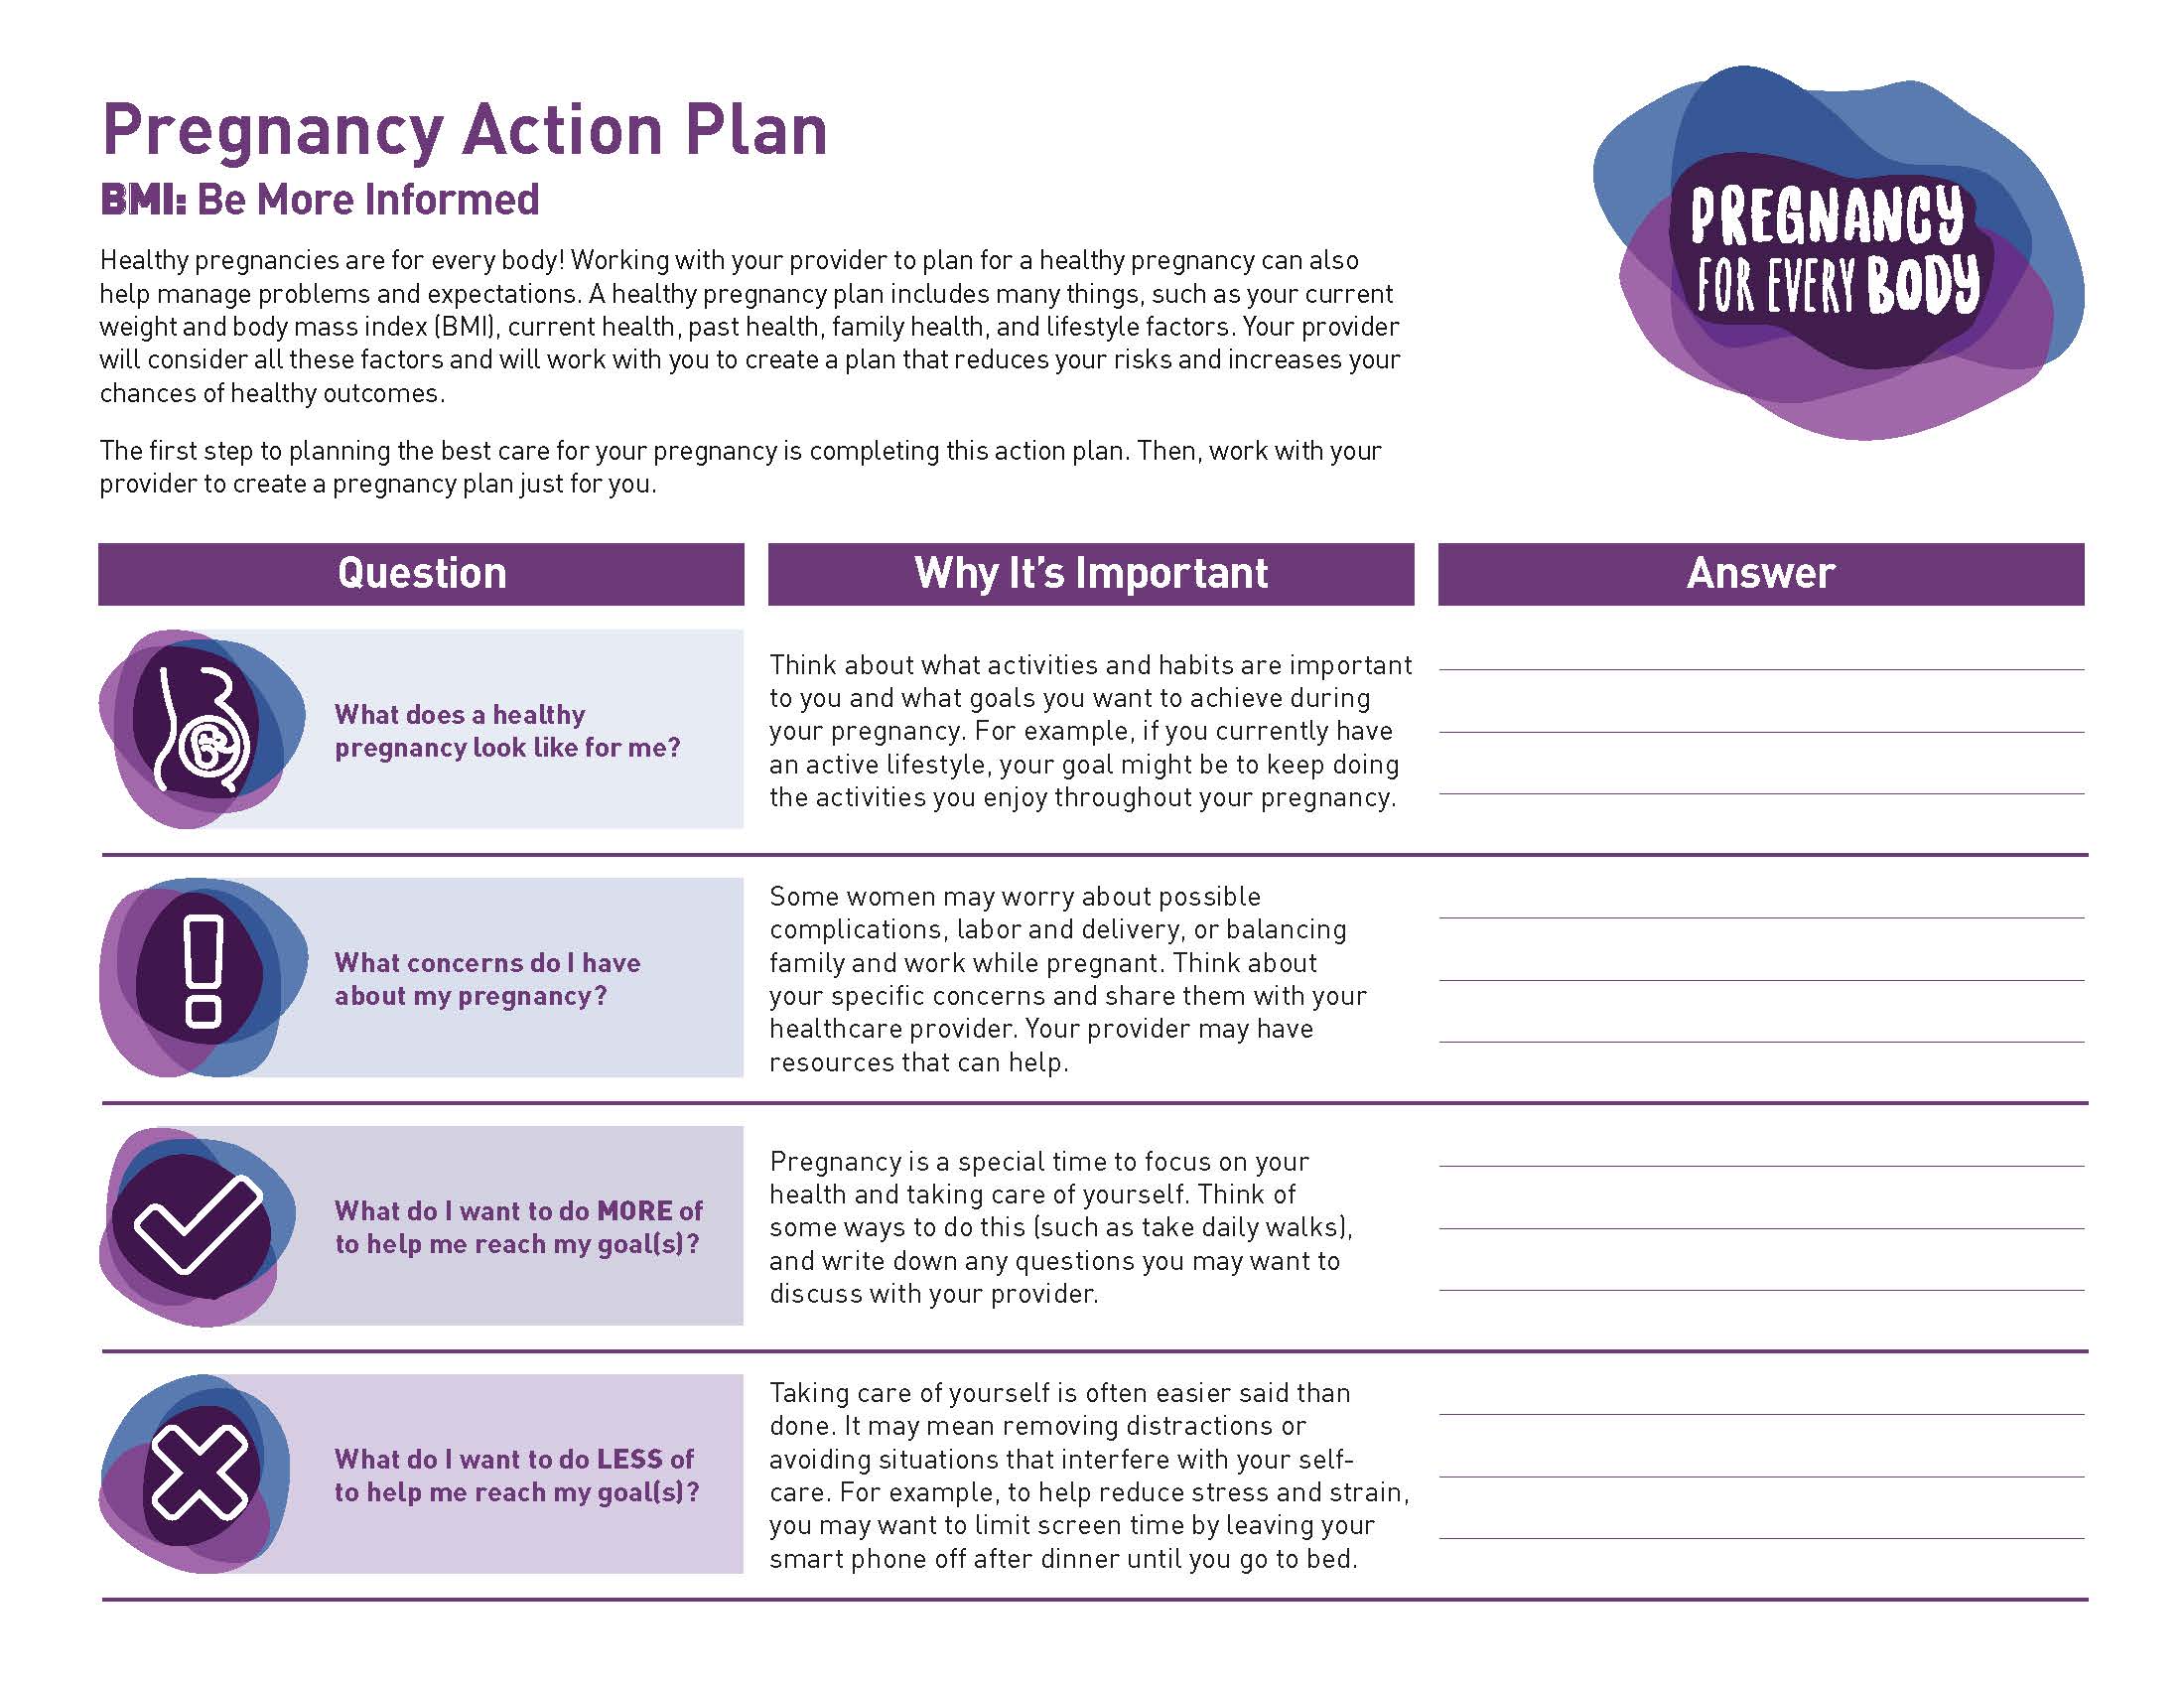 Image of the Pregnancy for Every Body Factsheet: Pregnancy Action Plan.